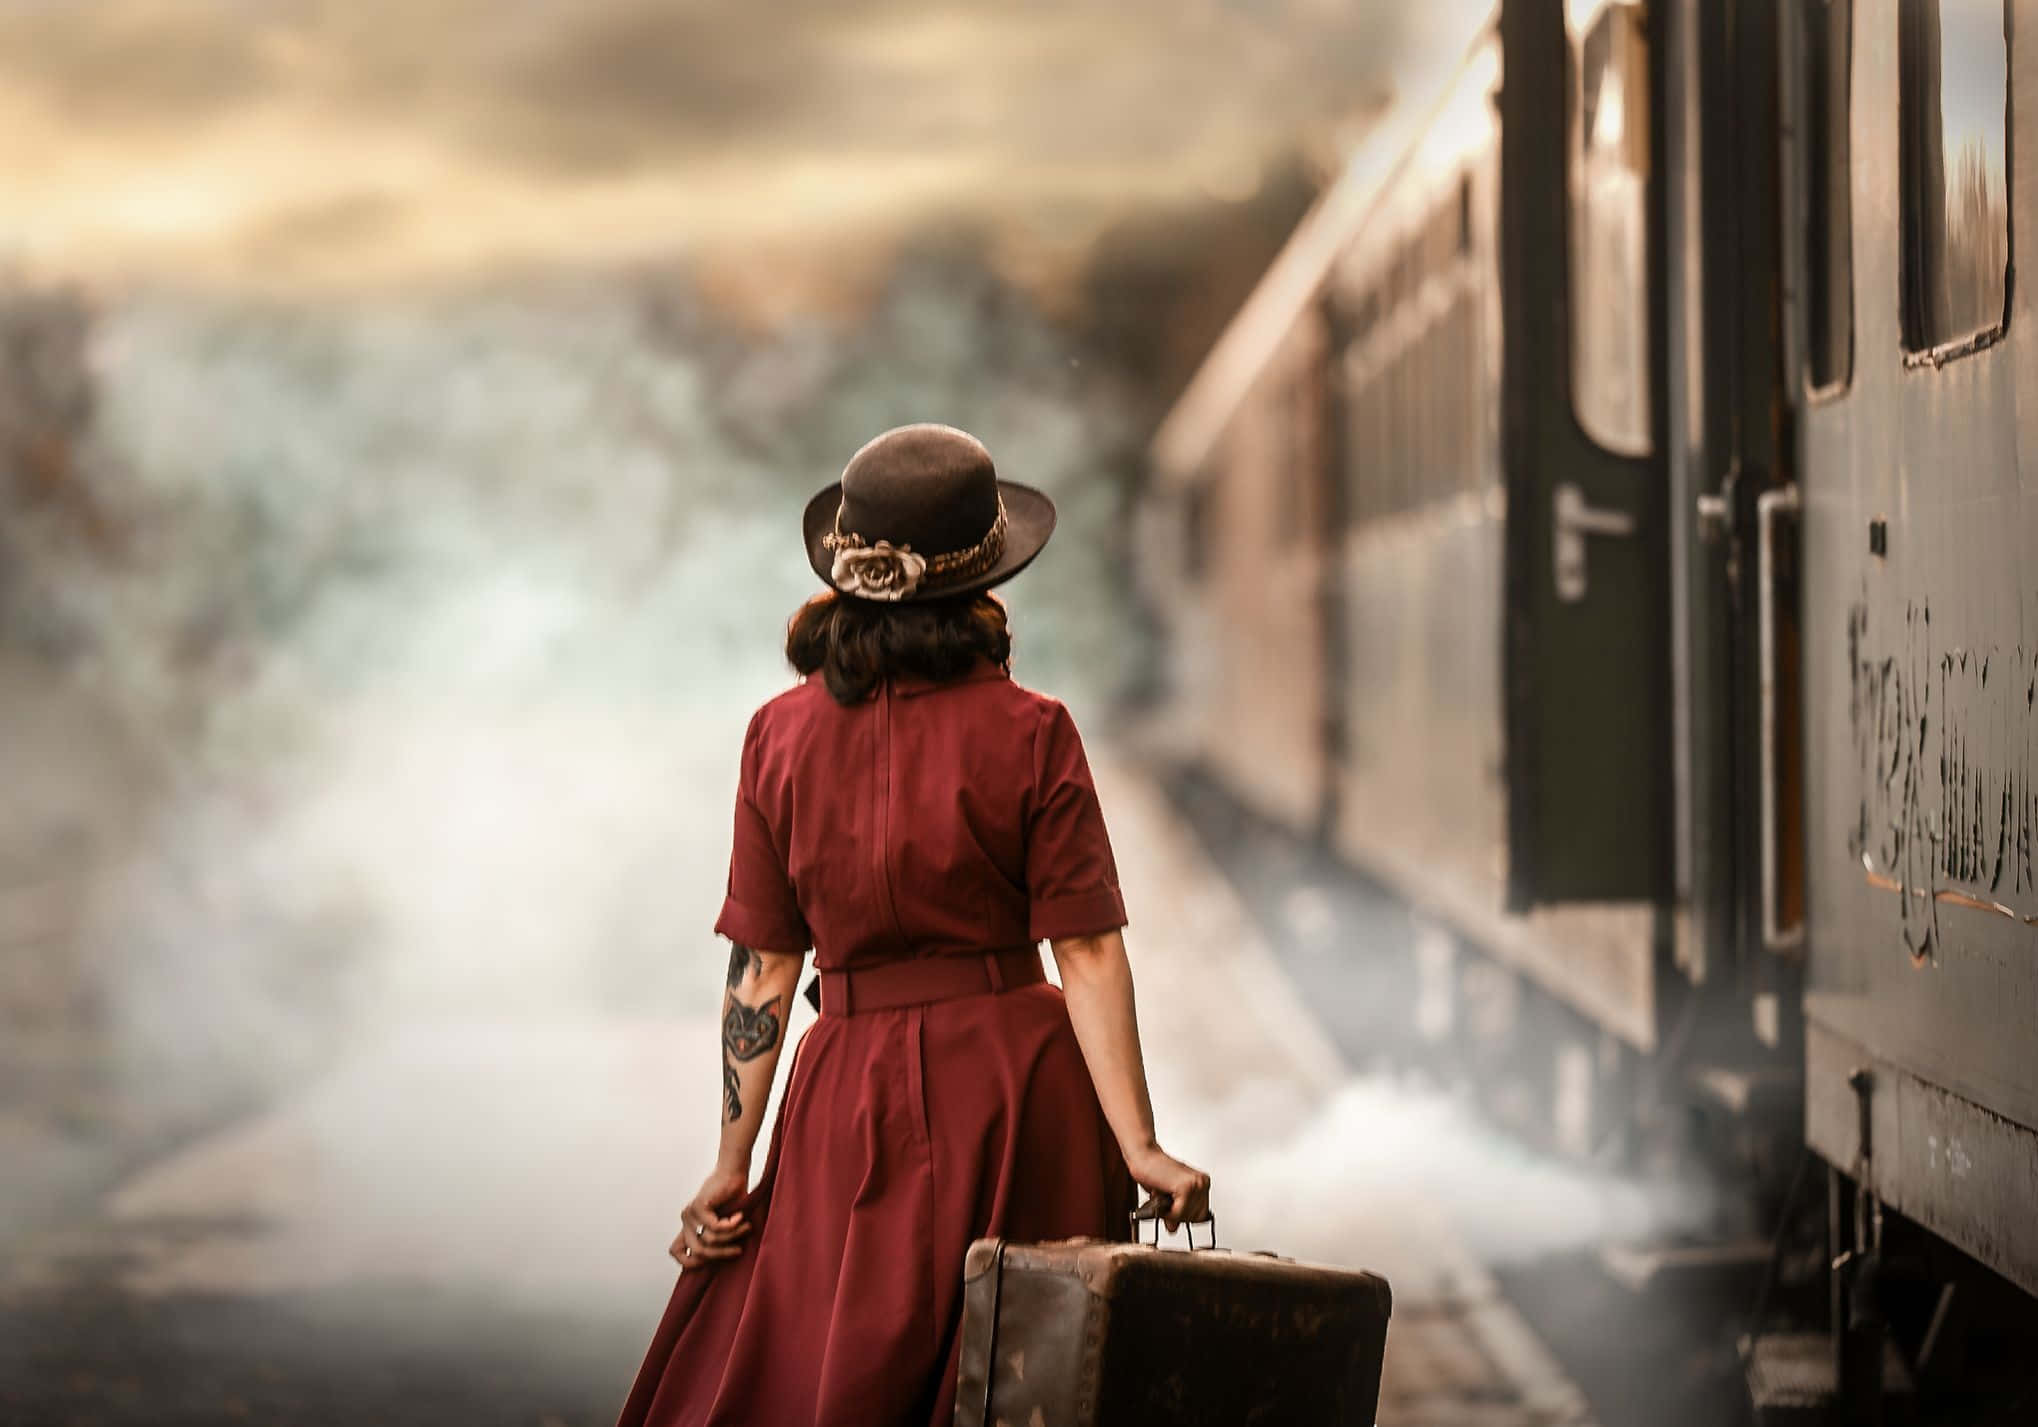 A Woman In A Red Dress Is Standing Next To A Train